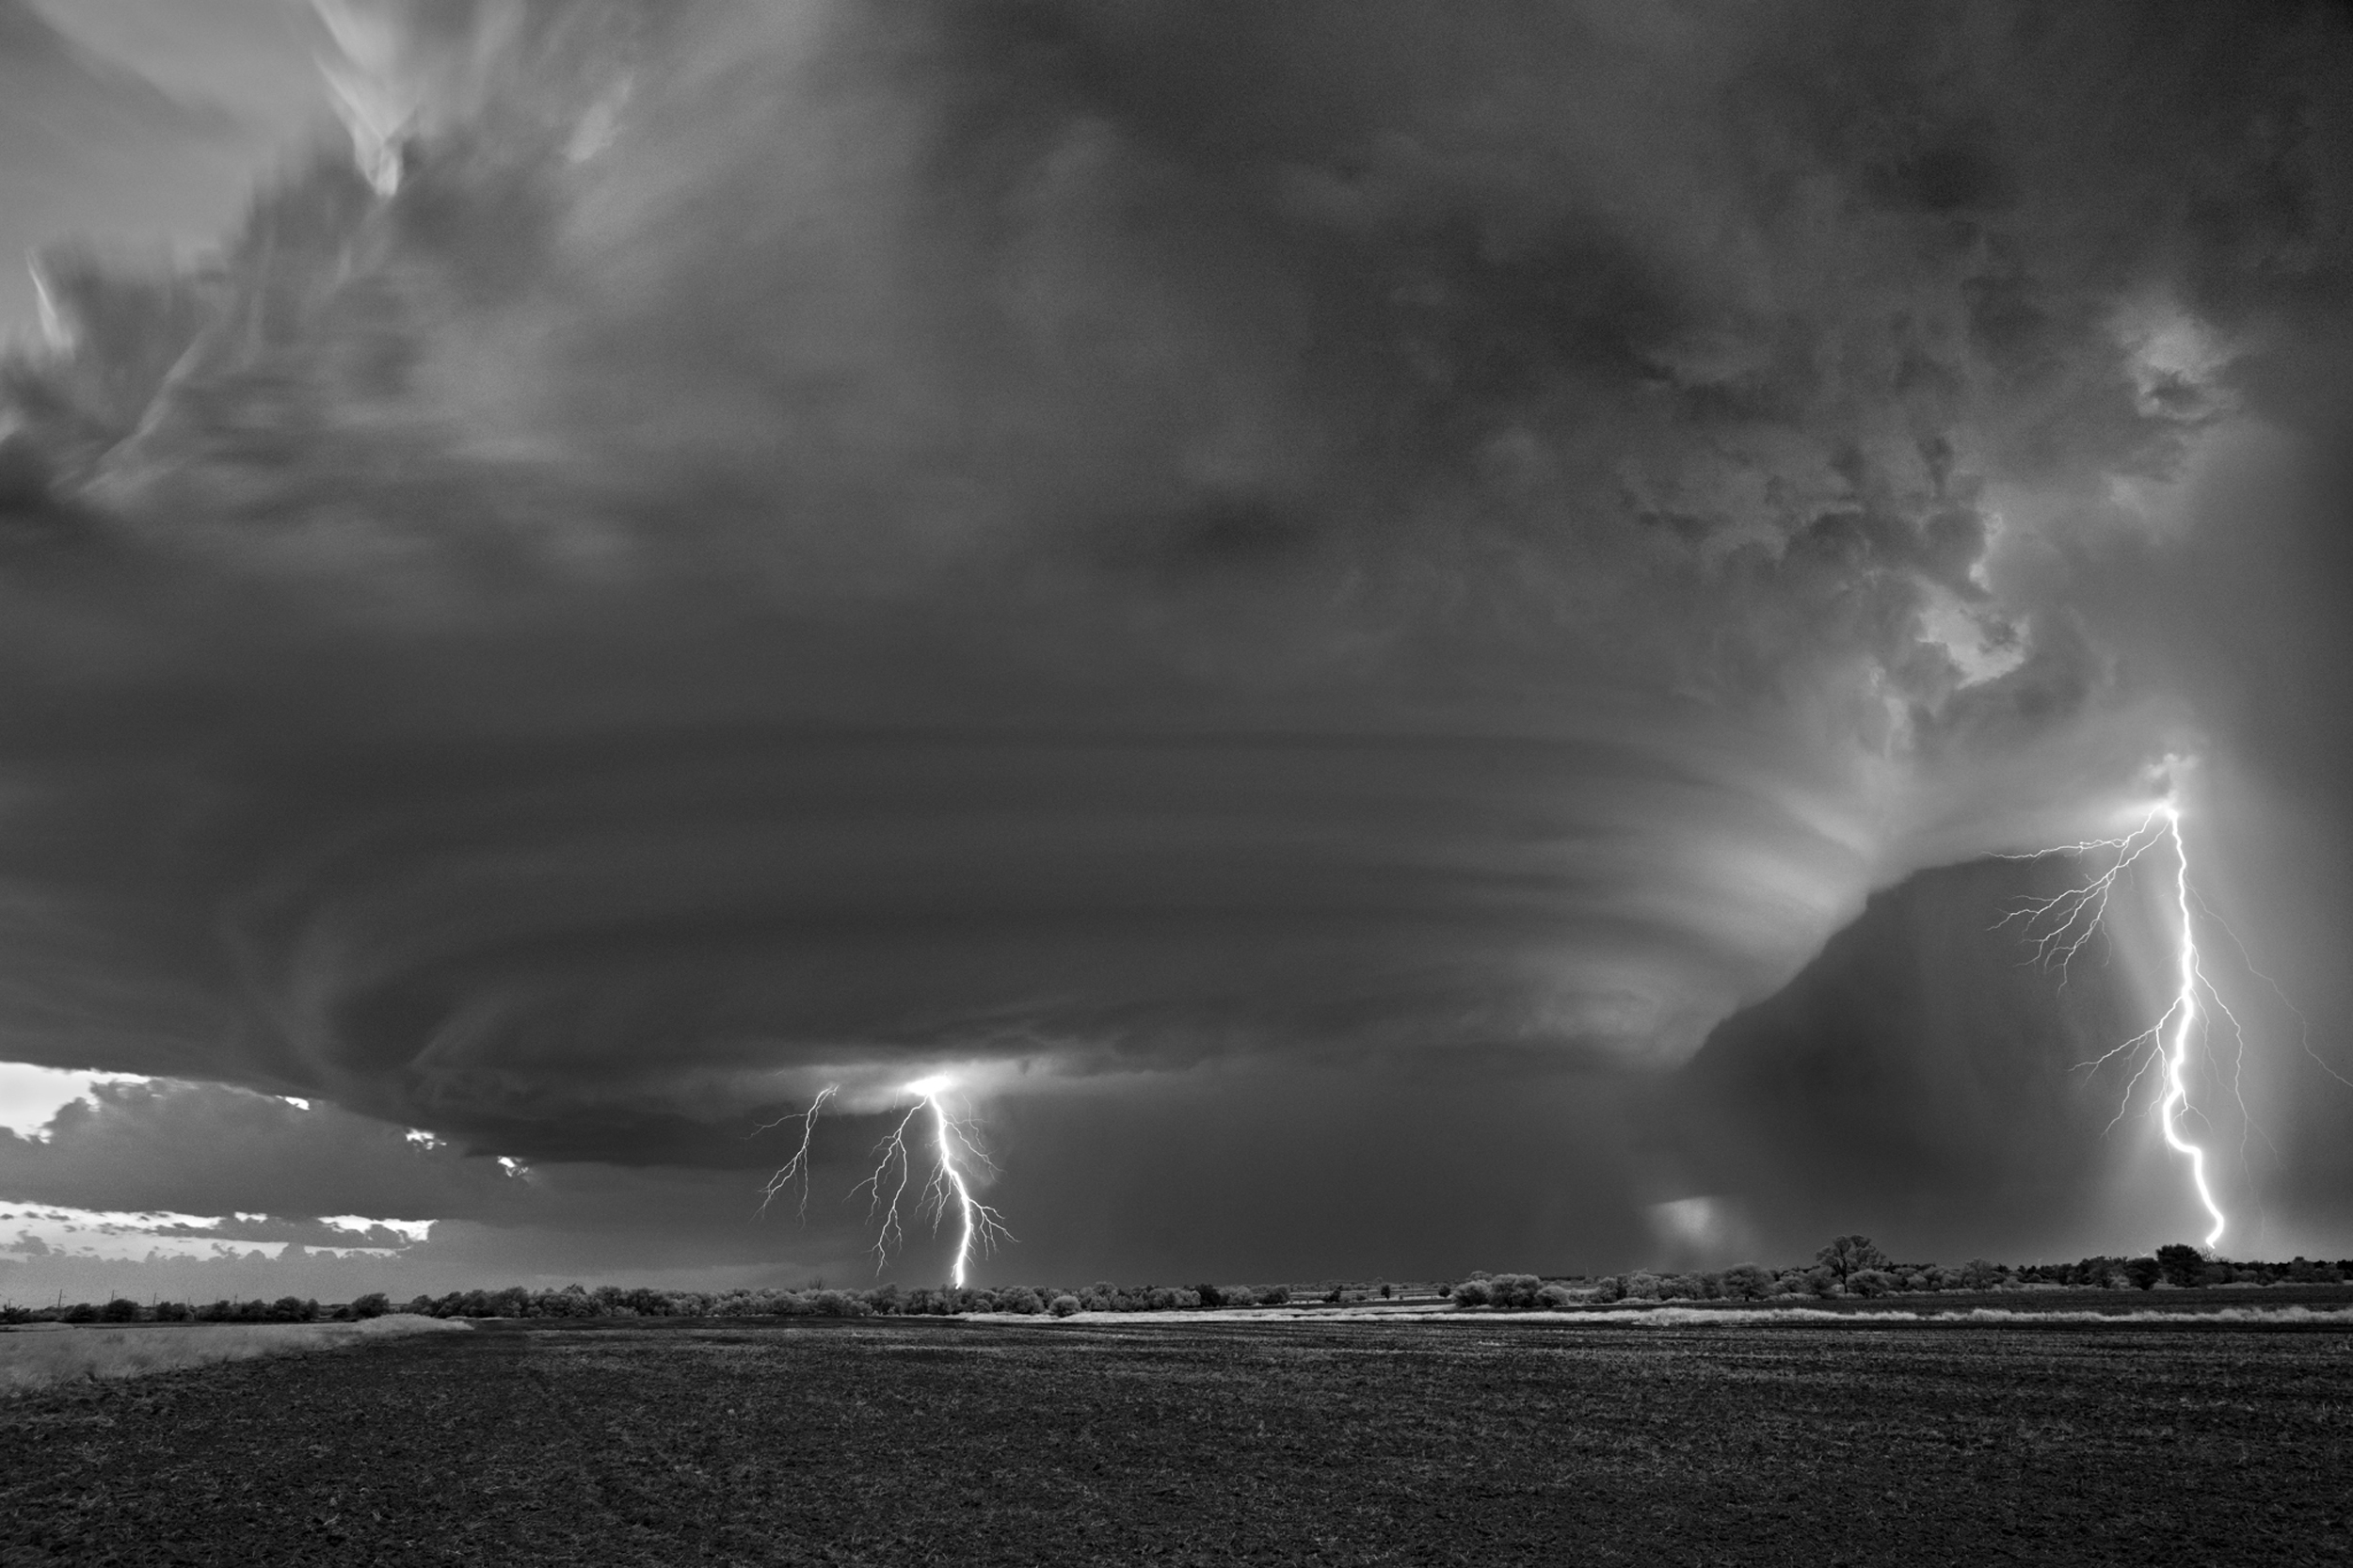 Photography Monochrome Storm Tornado Field Lightning Long Exposure Mitch Dobrowner Nature Supercell  2500x1666